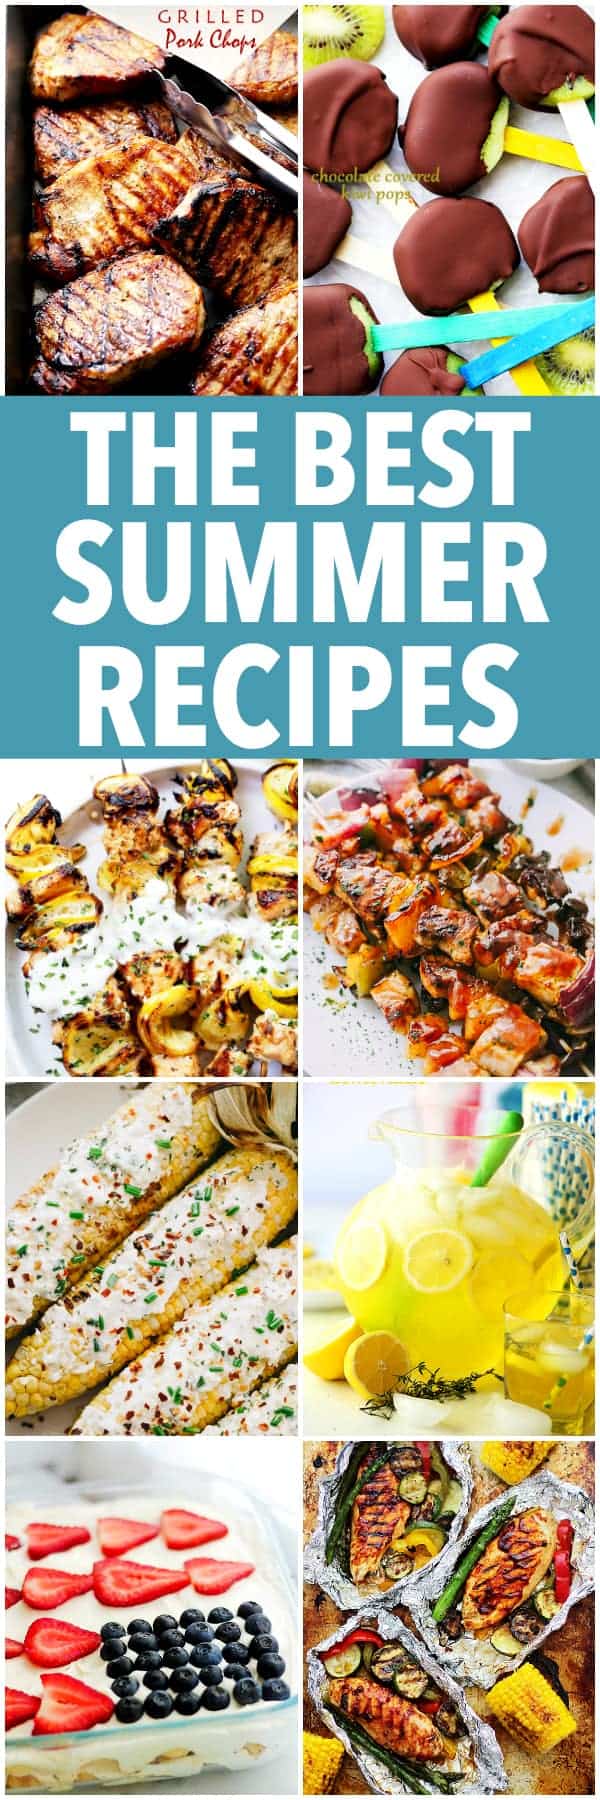 The Best 30 Summer Recipes - Your summer is about to get much more delicious! From grilled foods to salads and drinks, these summer recipes are delicious, easy, and perfect for your next backyard party.